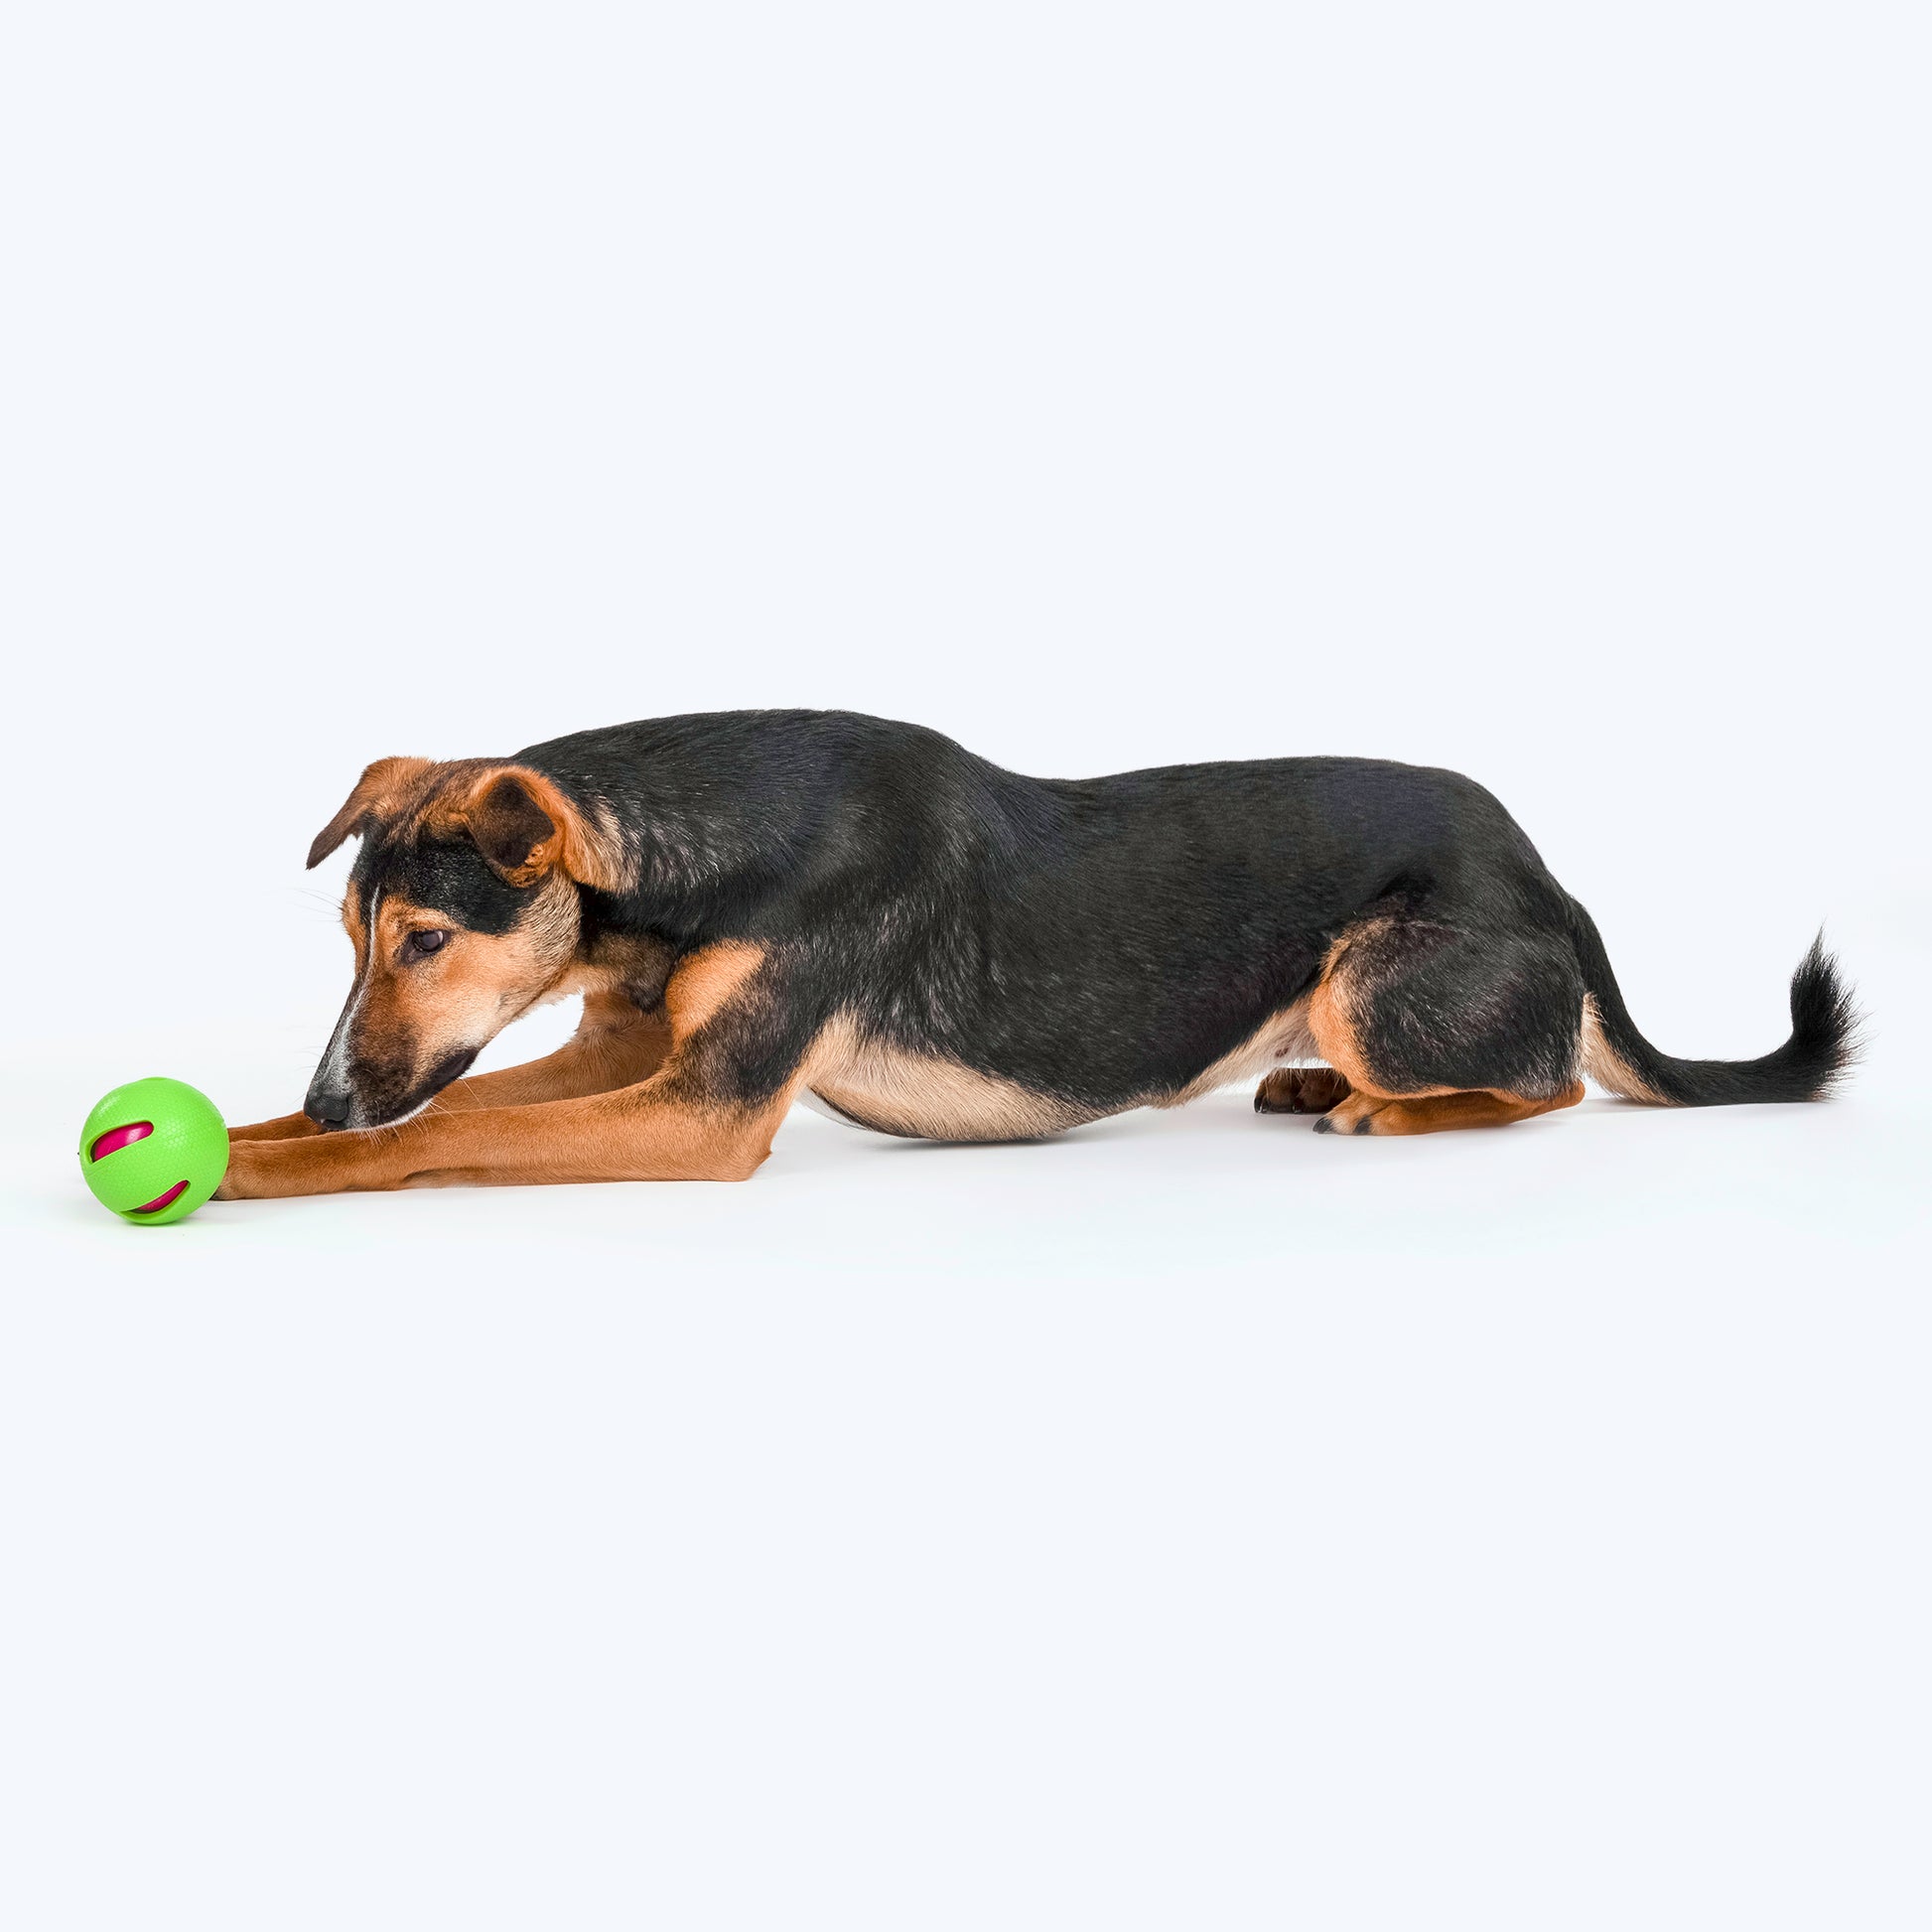 HUFT Basics Have-A-Ball Squeaky Toy For Dog - Assorted - Heads Up For Tails